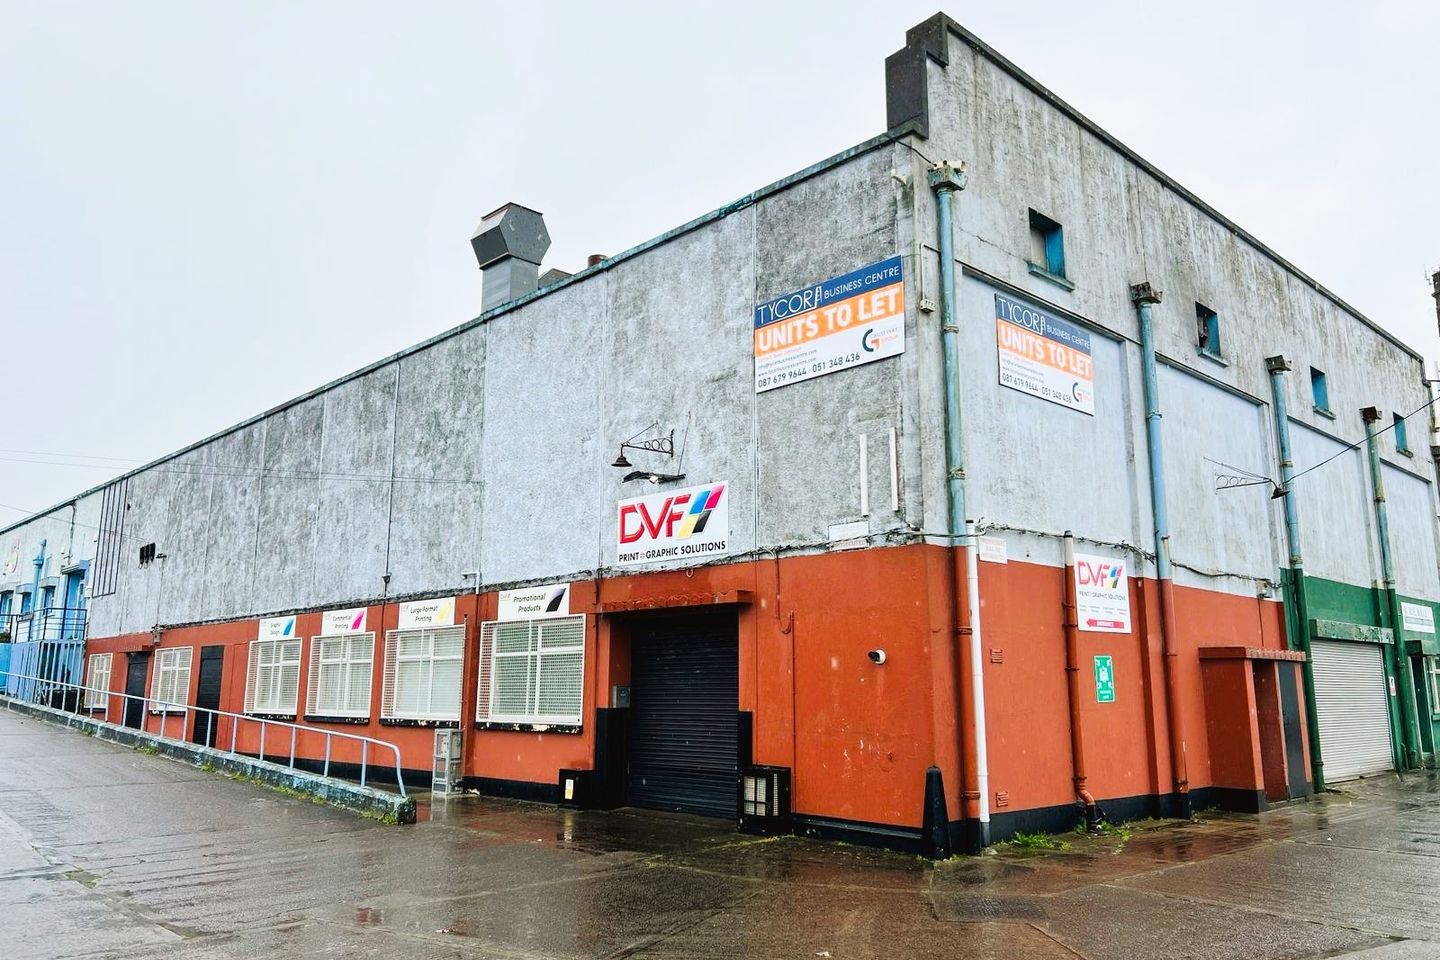 Commercial Unit Tycor Industrial Complex, Slievekeale, Waterford City, Co. Waterford